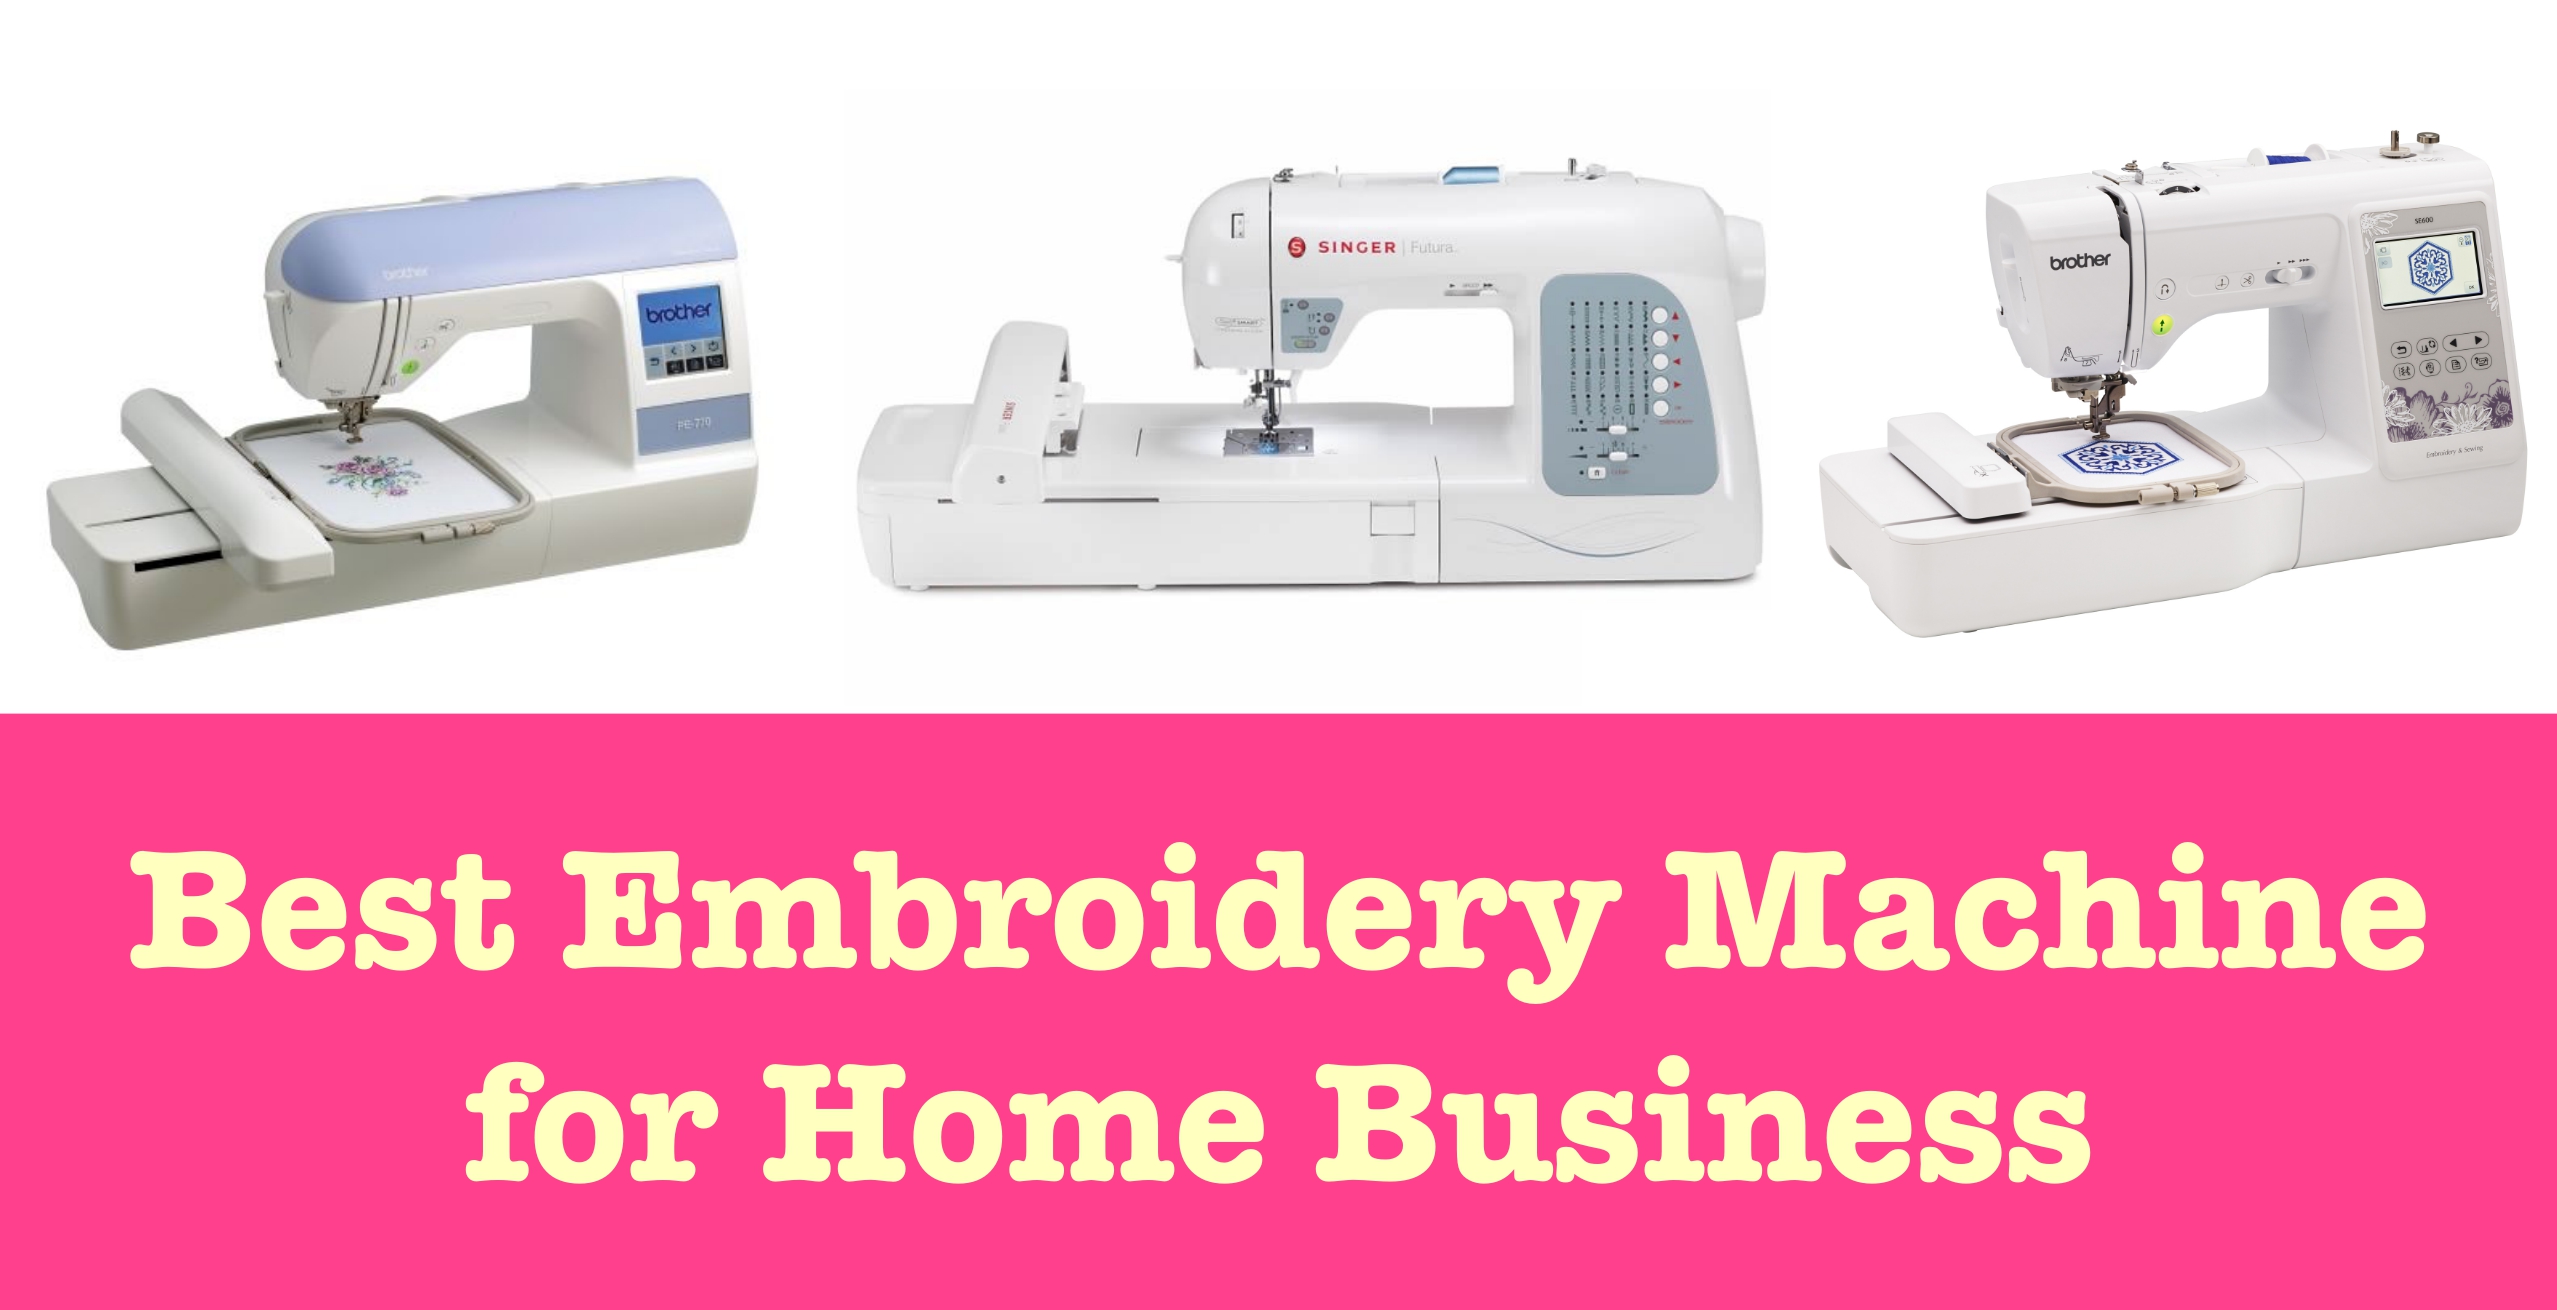 Best Embroidery Machine for Home Business